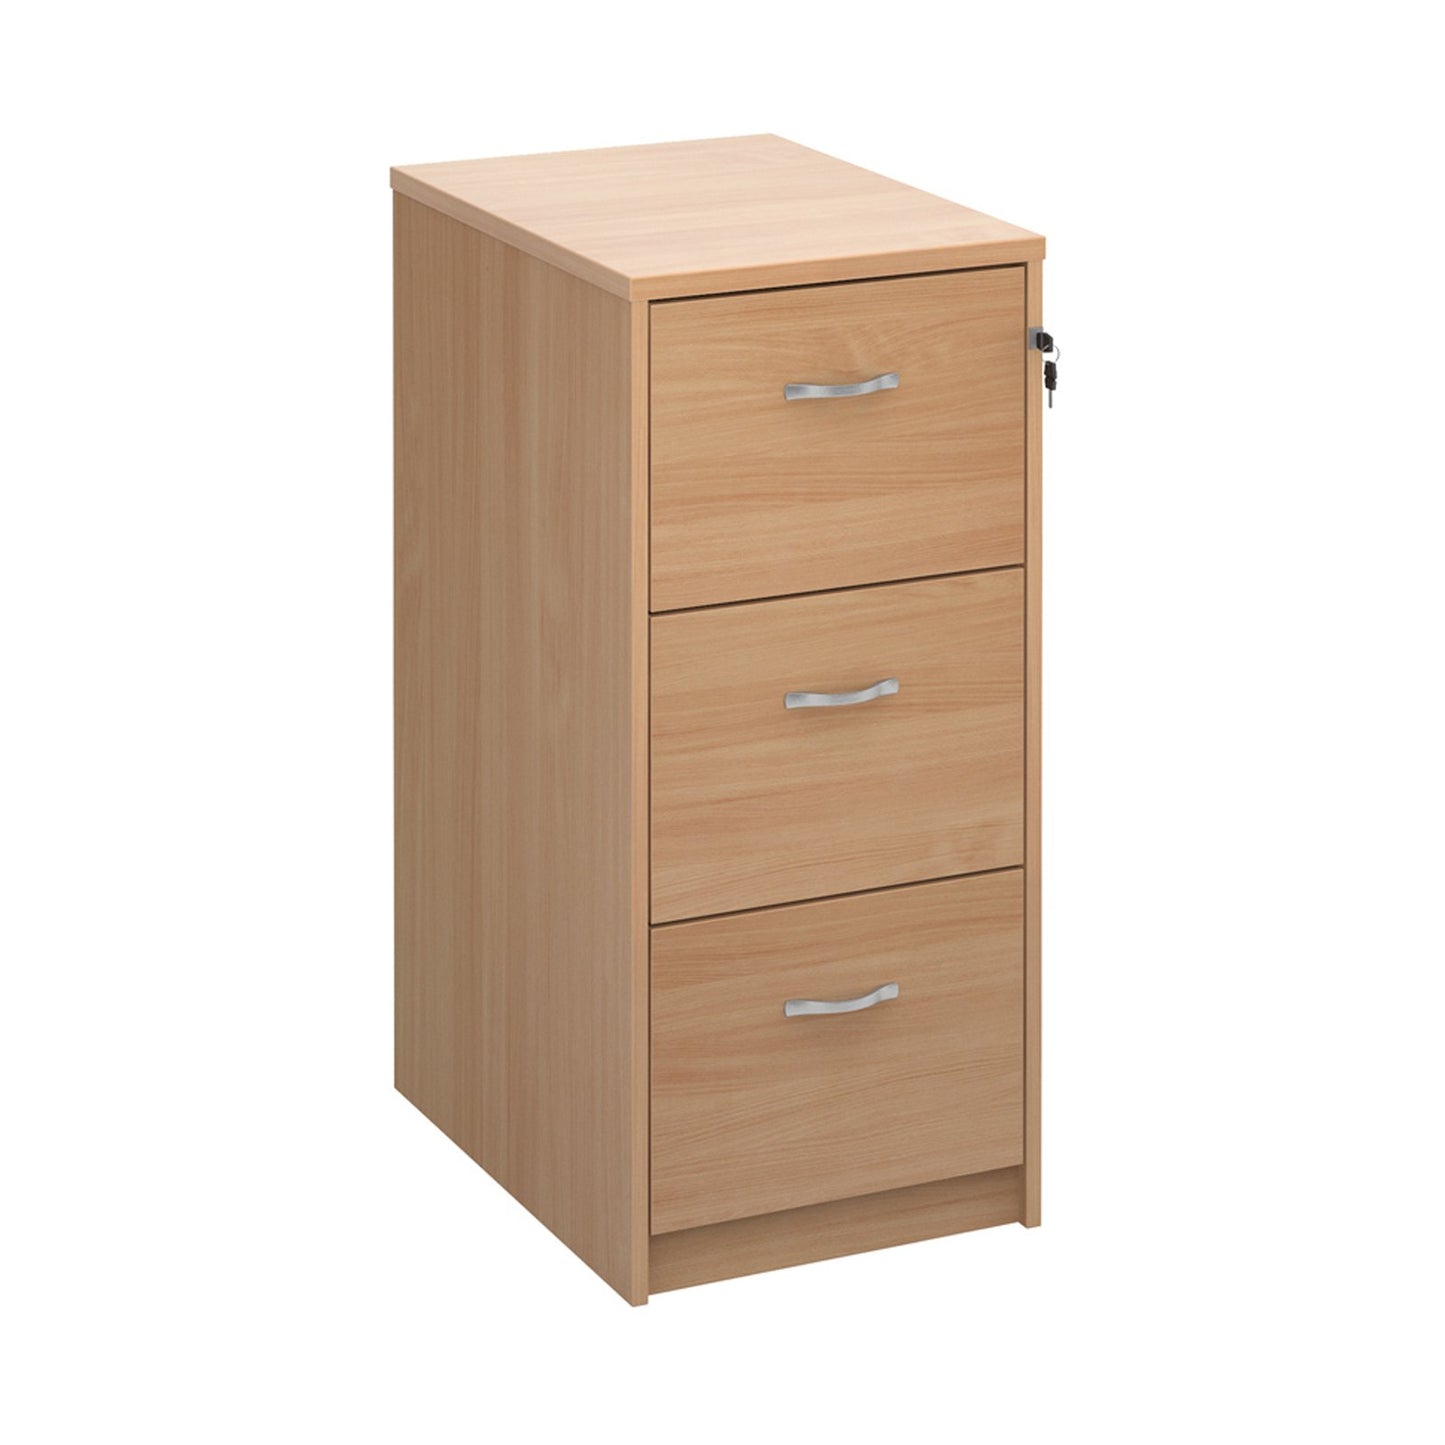 Wooden Filing Cabinet With Silver Handles - 4 Drawer - Grey Oak